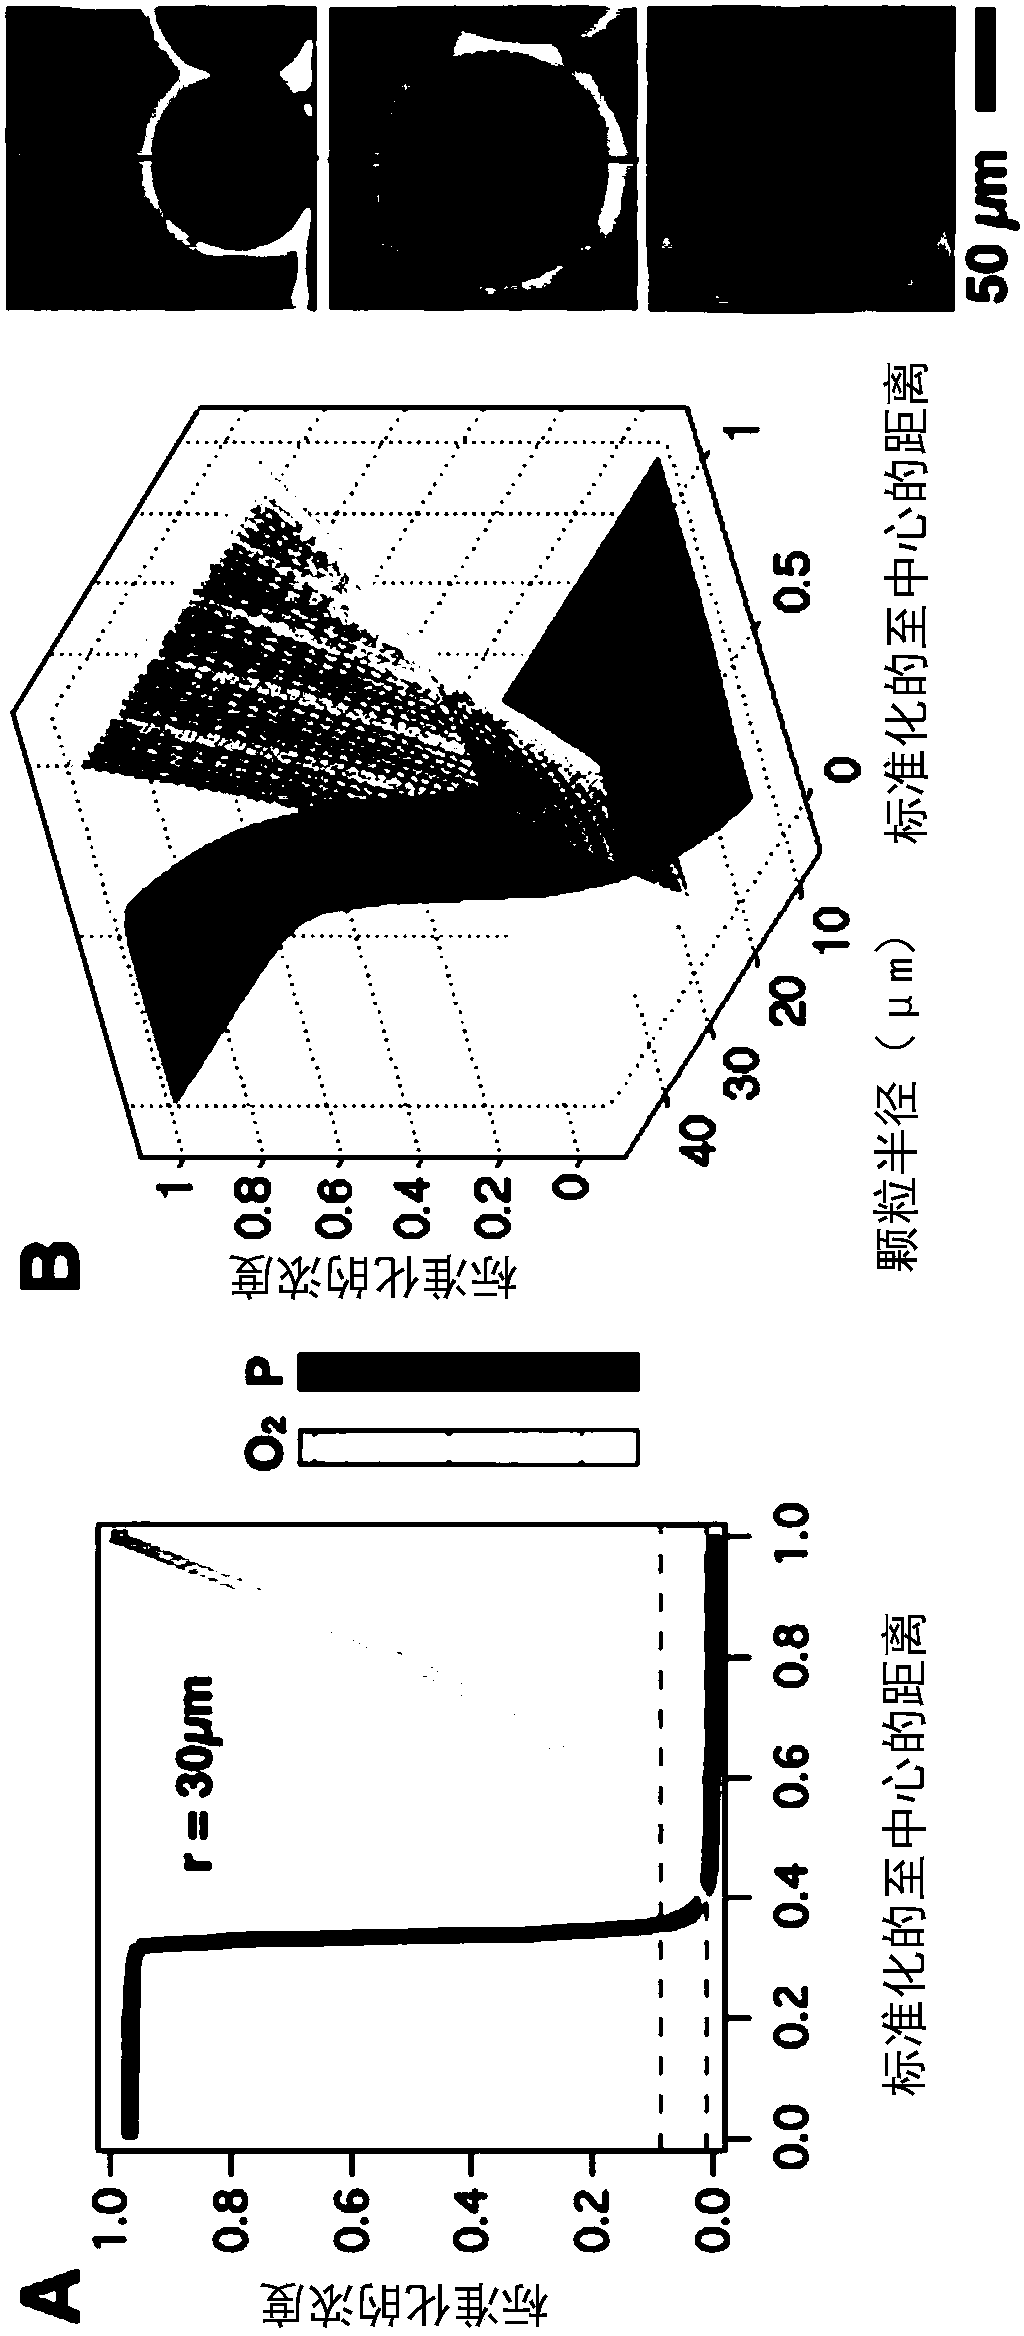 Methods of generating microparticles and porous hydrogels using microfluidics